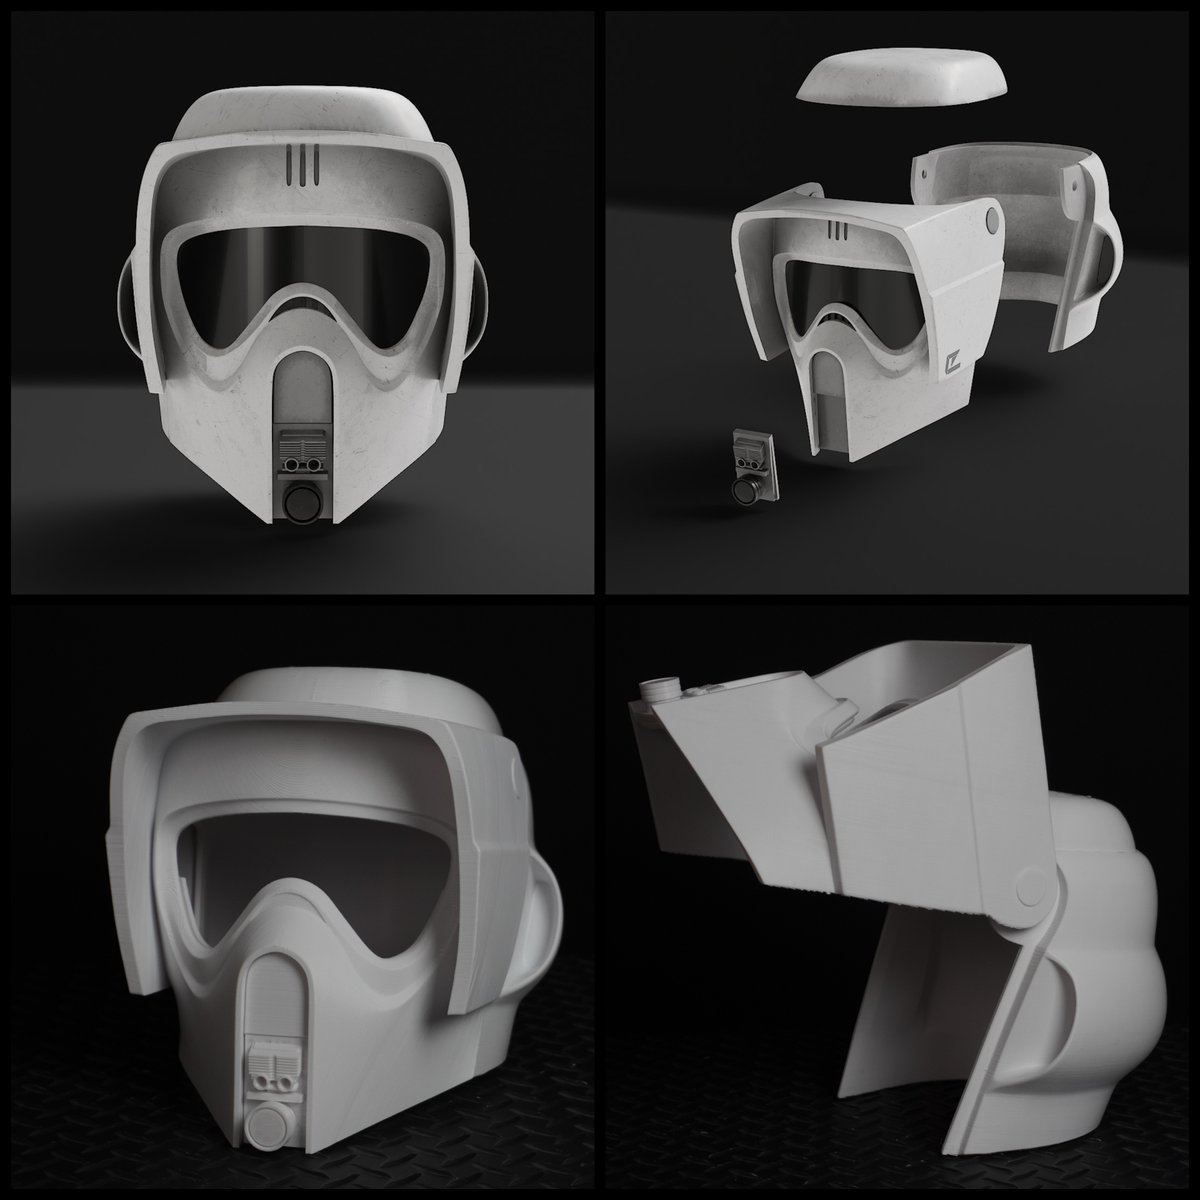 The Scout Trooper helmet and prints have landed! Find the files at Patreon.com/galacticarmory and the raw prints at GalacticArmory.net

#starwars #scouttrooper #501st #3dprinting #3dprint #3dprinted